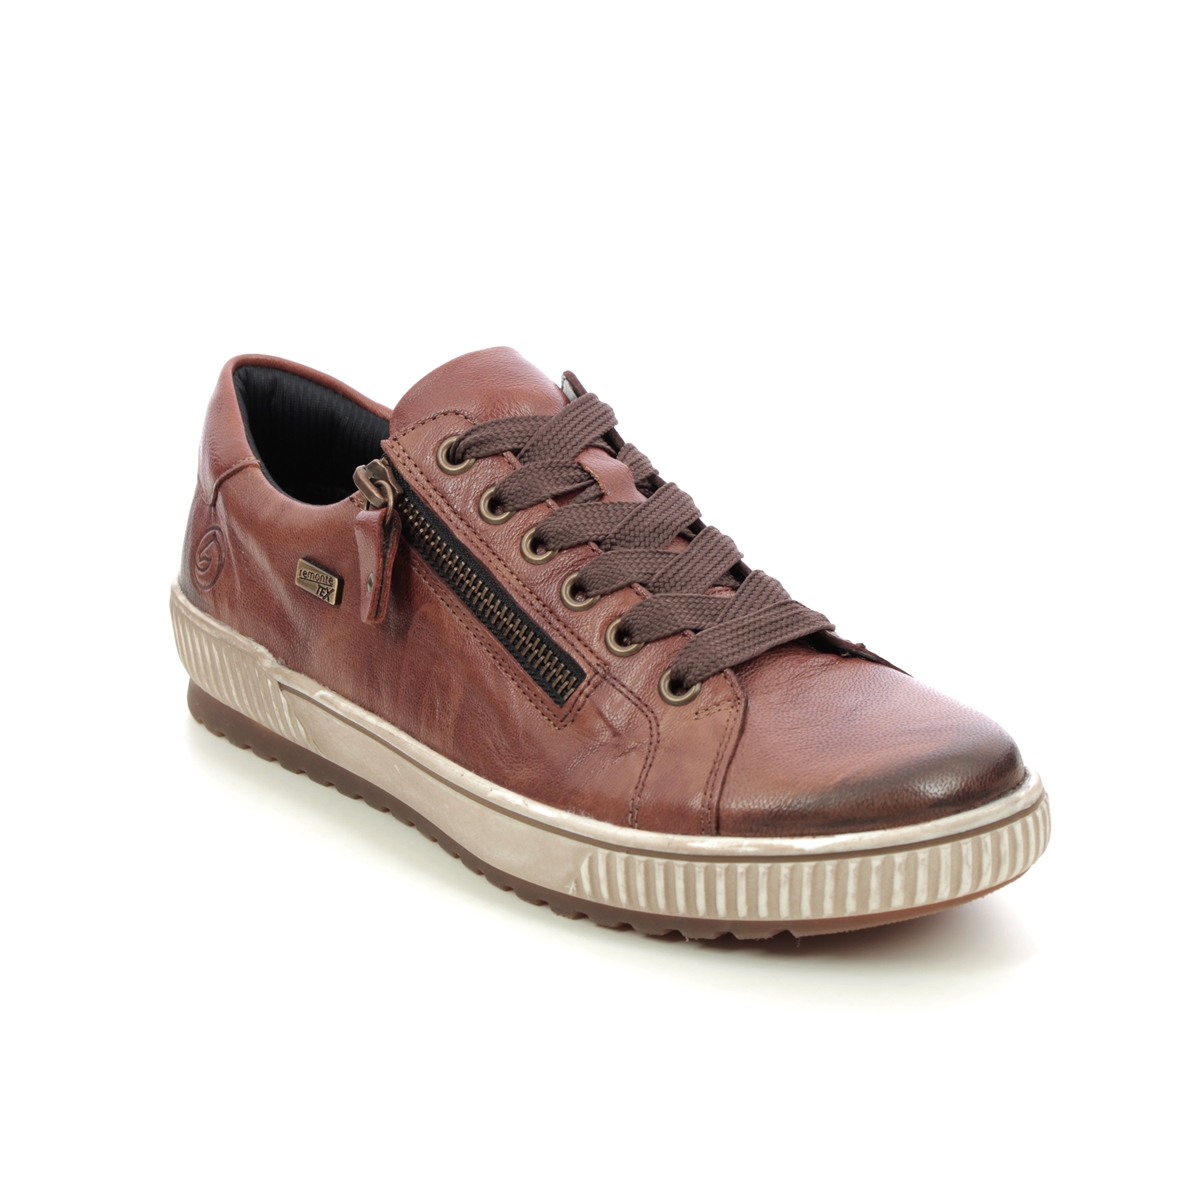 Remonte Tanash Tex Tan Leather Womens Lacing Shoes D0700-22 In Size 43 In Plain Tan Leather